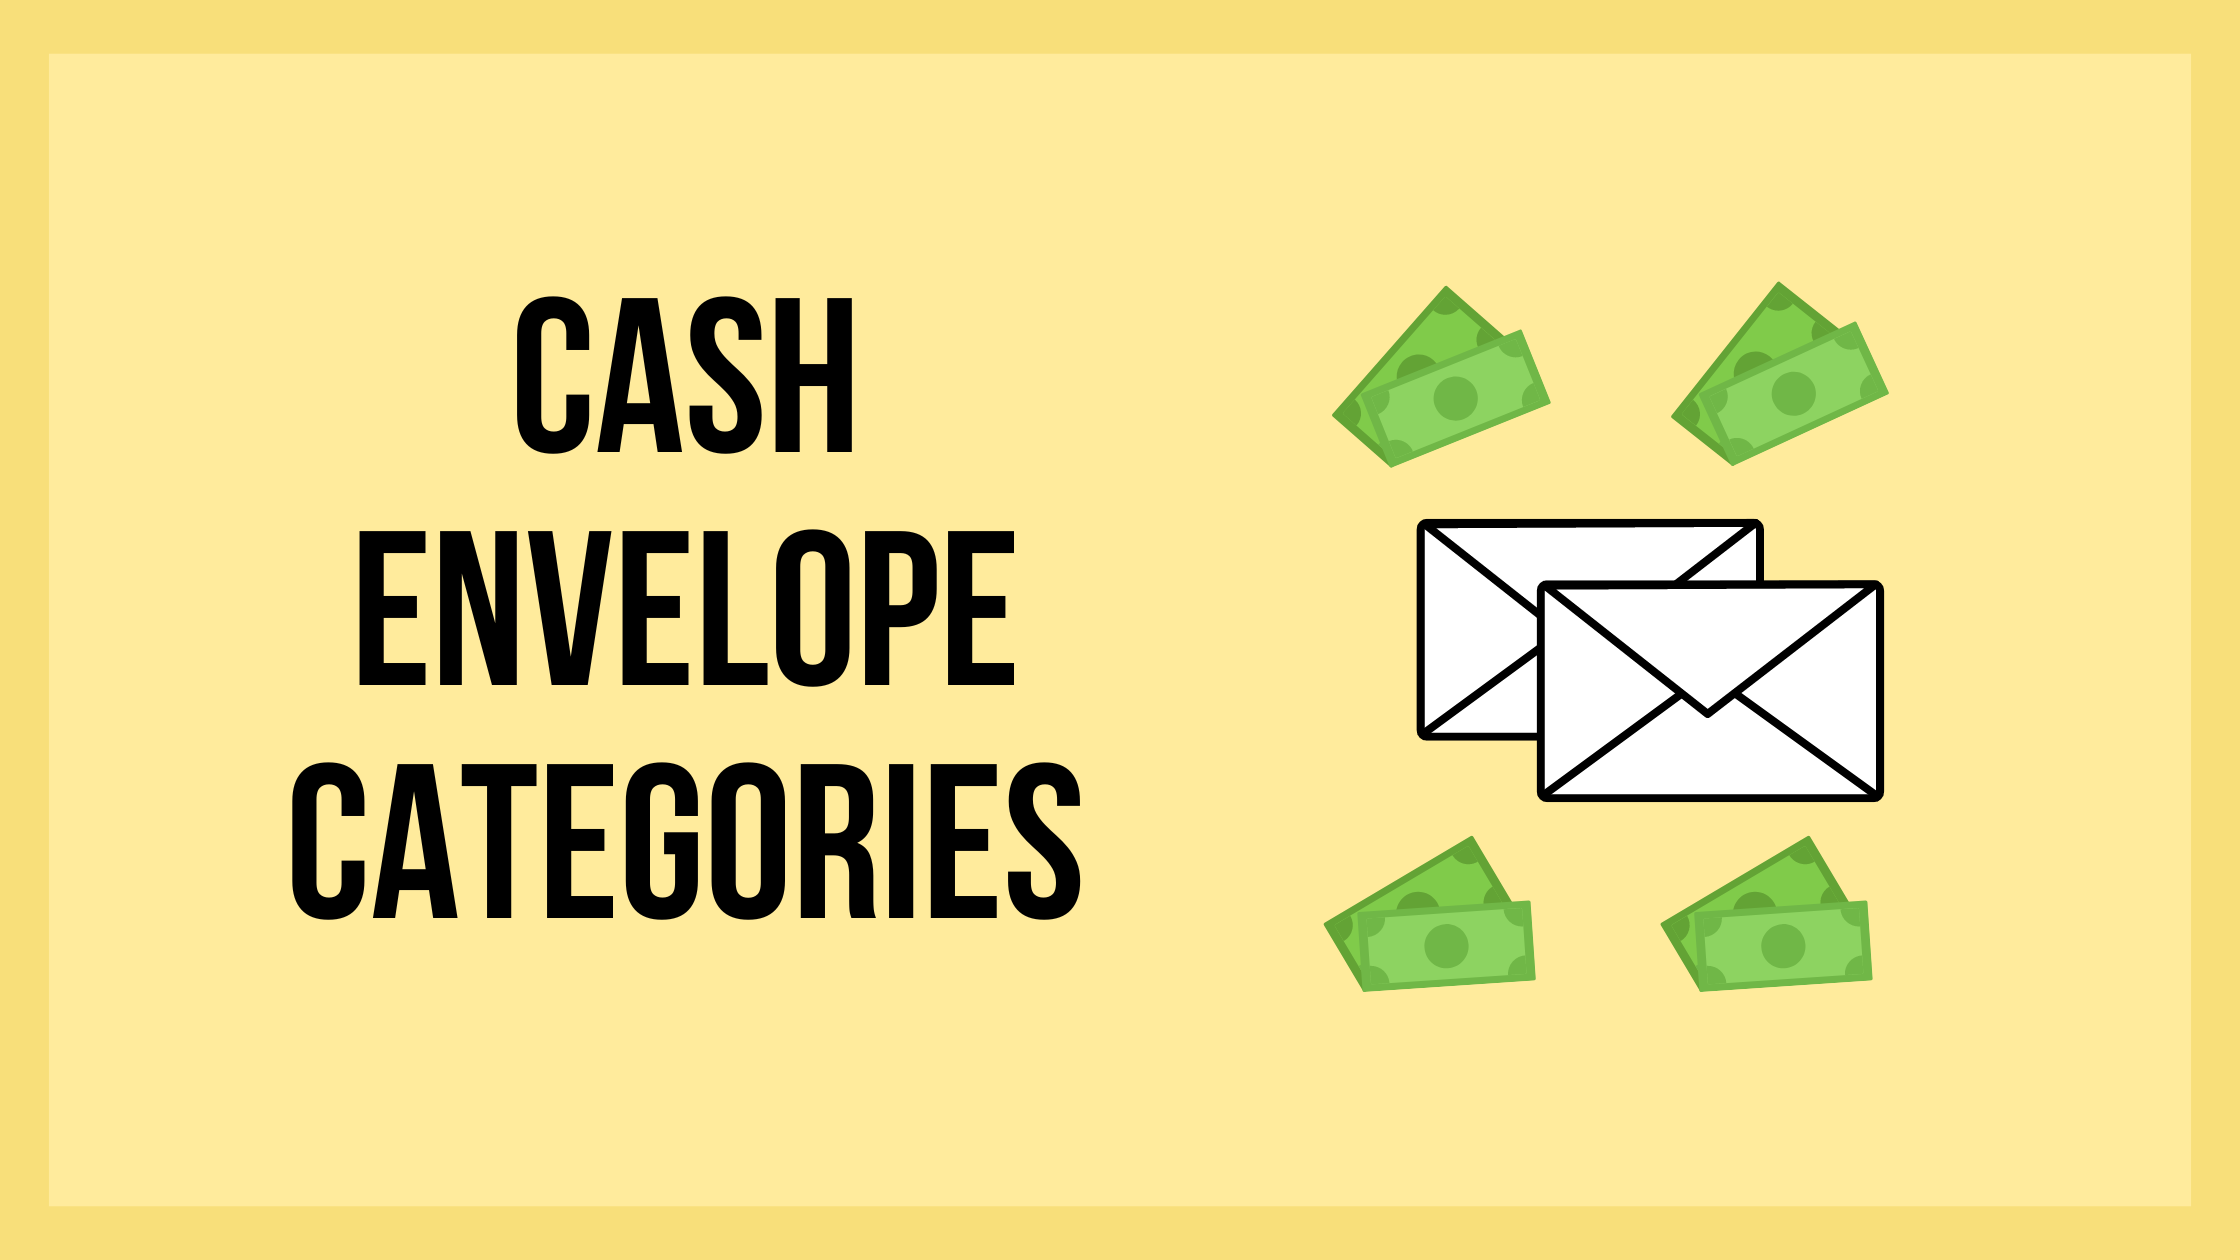 What is cash stuffing?, Cash envelope system explained